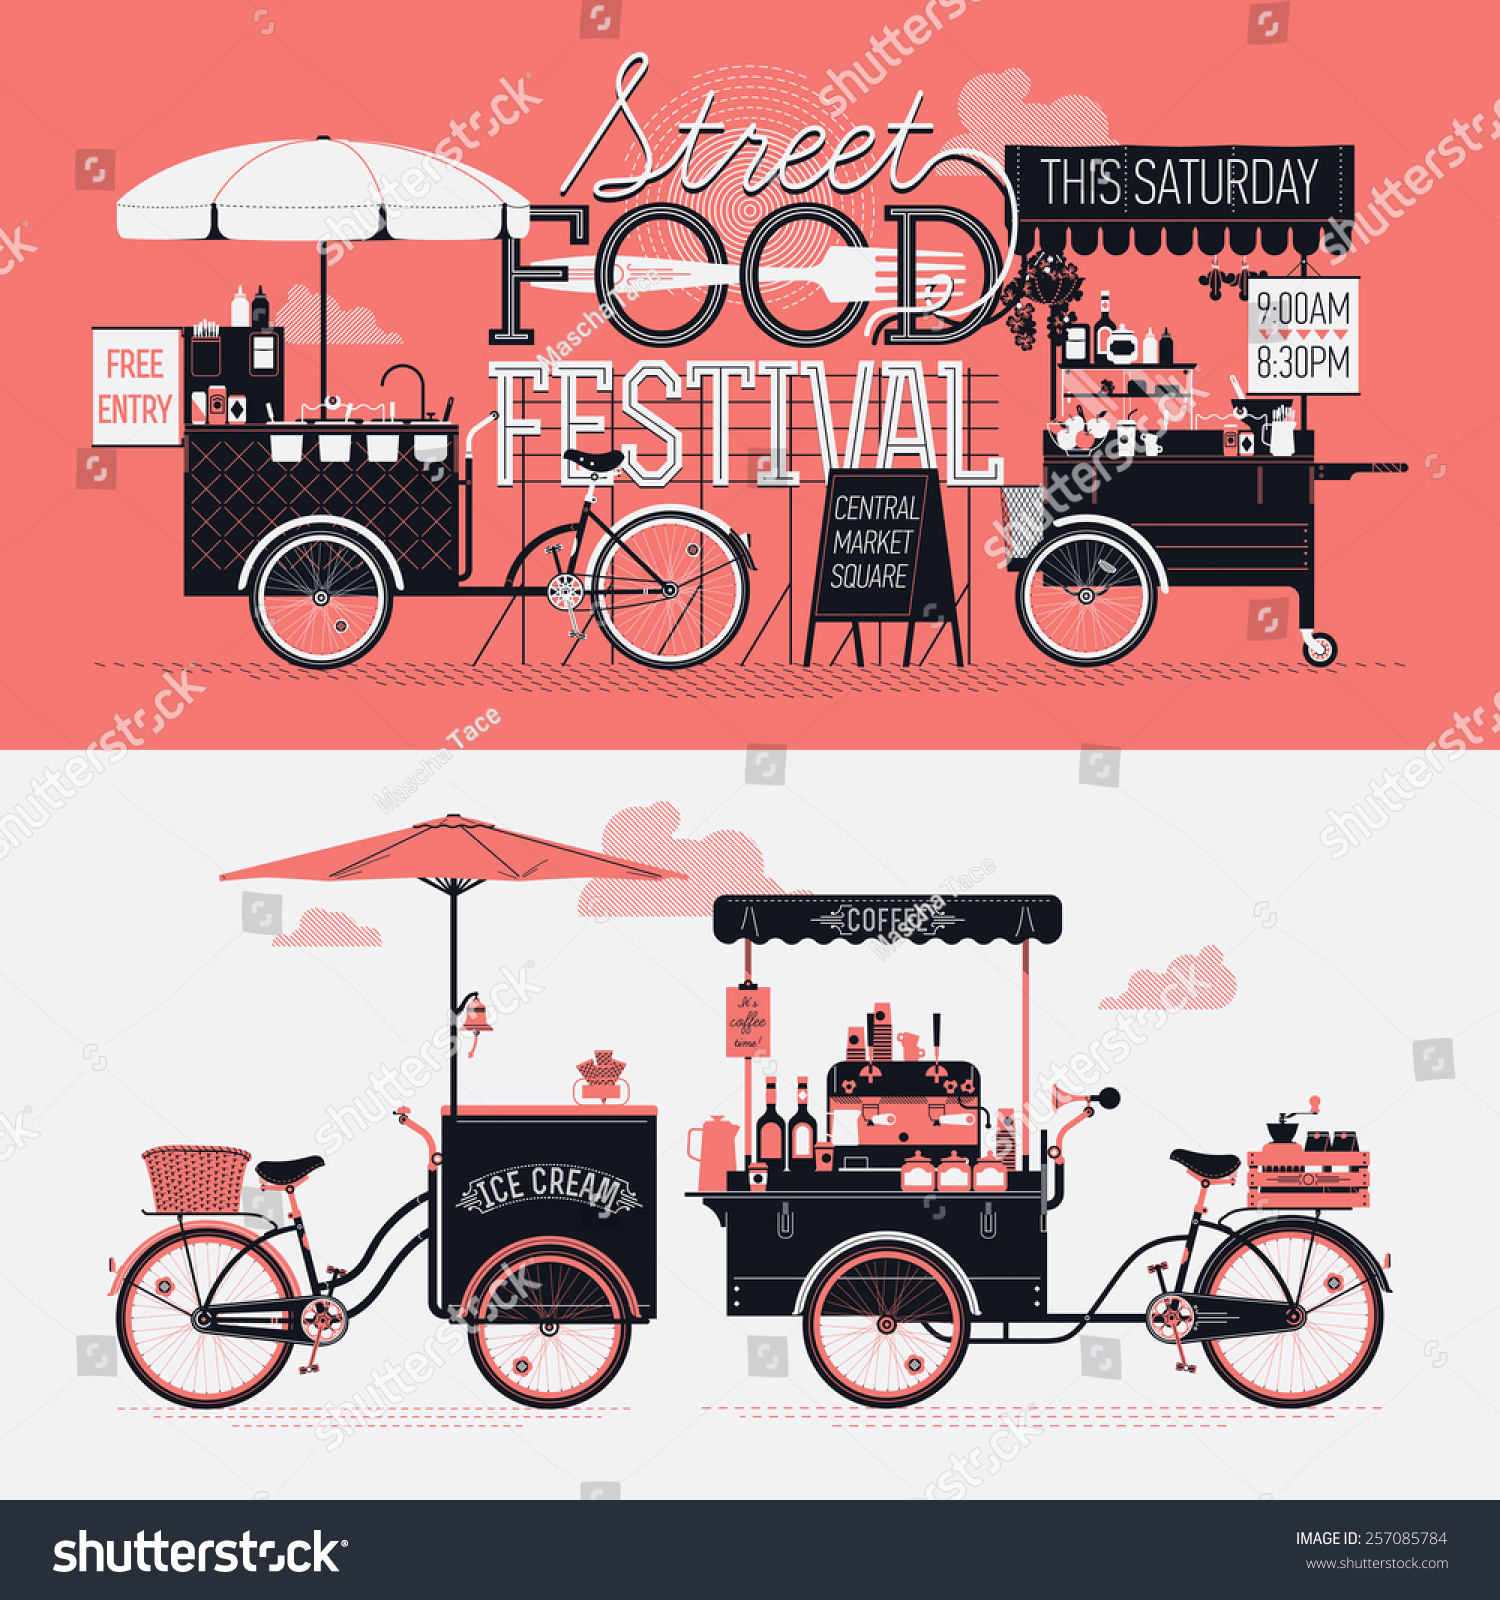 SVG of Street food festival event vector graphic poster, flyer or horizontal banner design elements with retro looking detailed vending portable carts selling coffee, hot dogs and ice cream svg